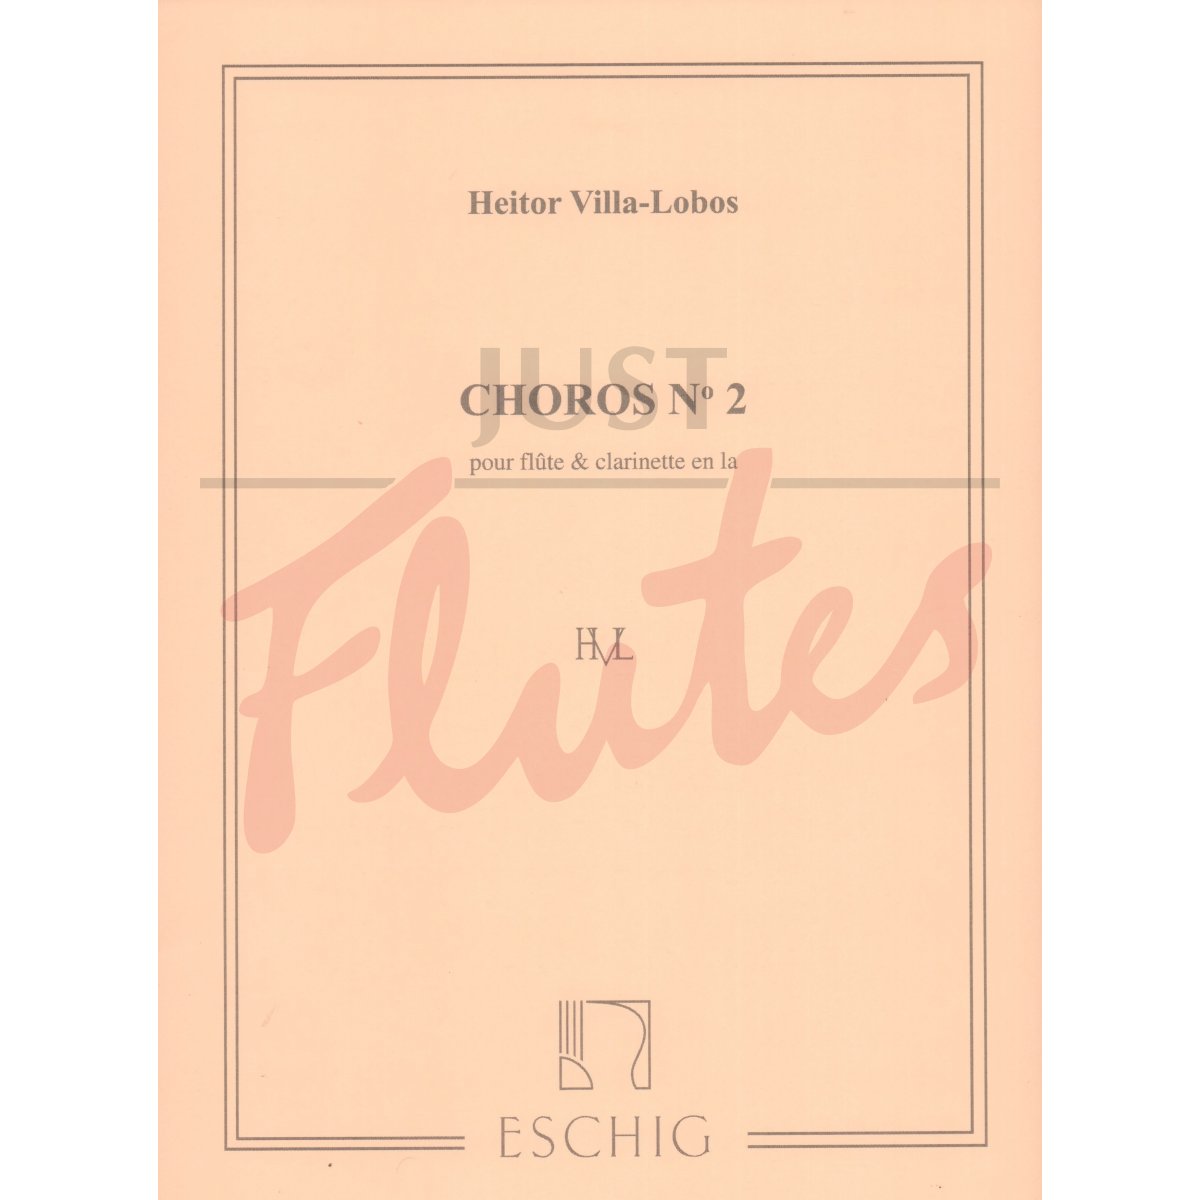 Choros No 2 for Flute and Clarinet in A